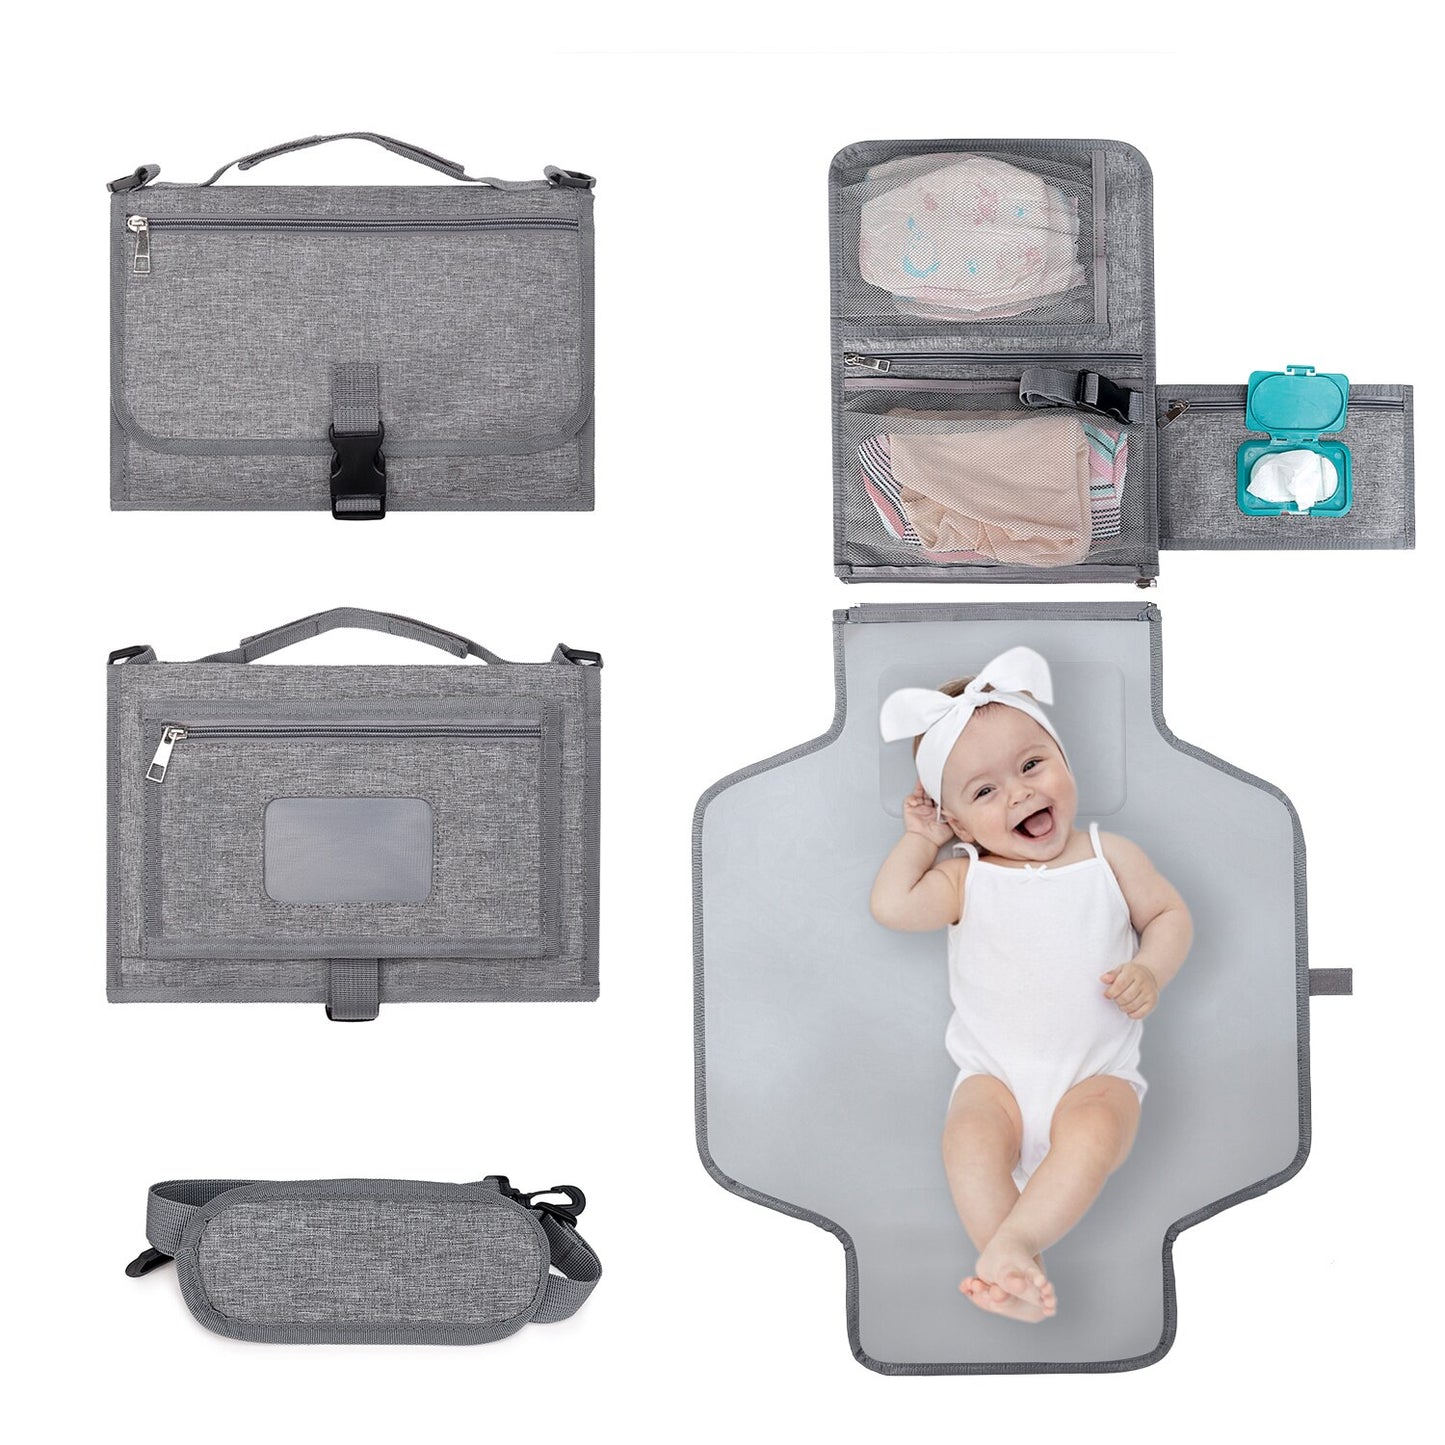 Diaper Change Pad with Shoulder Strap, Detachable Baby Changing Pad